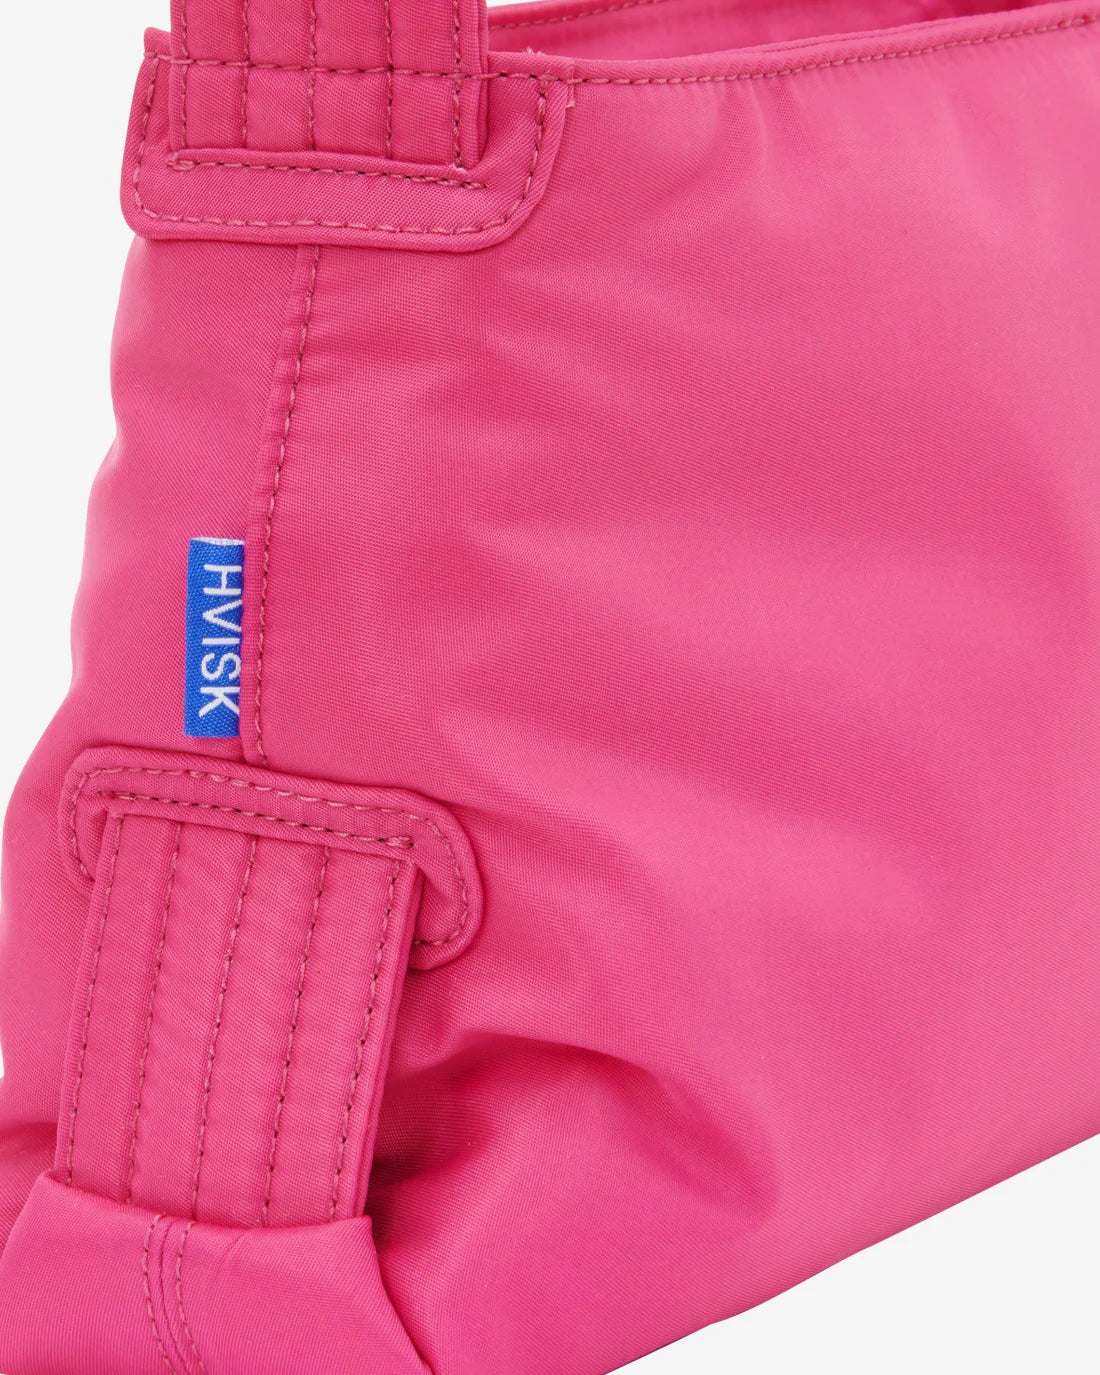 SCAPE TWILL - ULTRA PINK